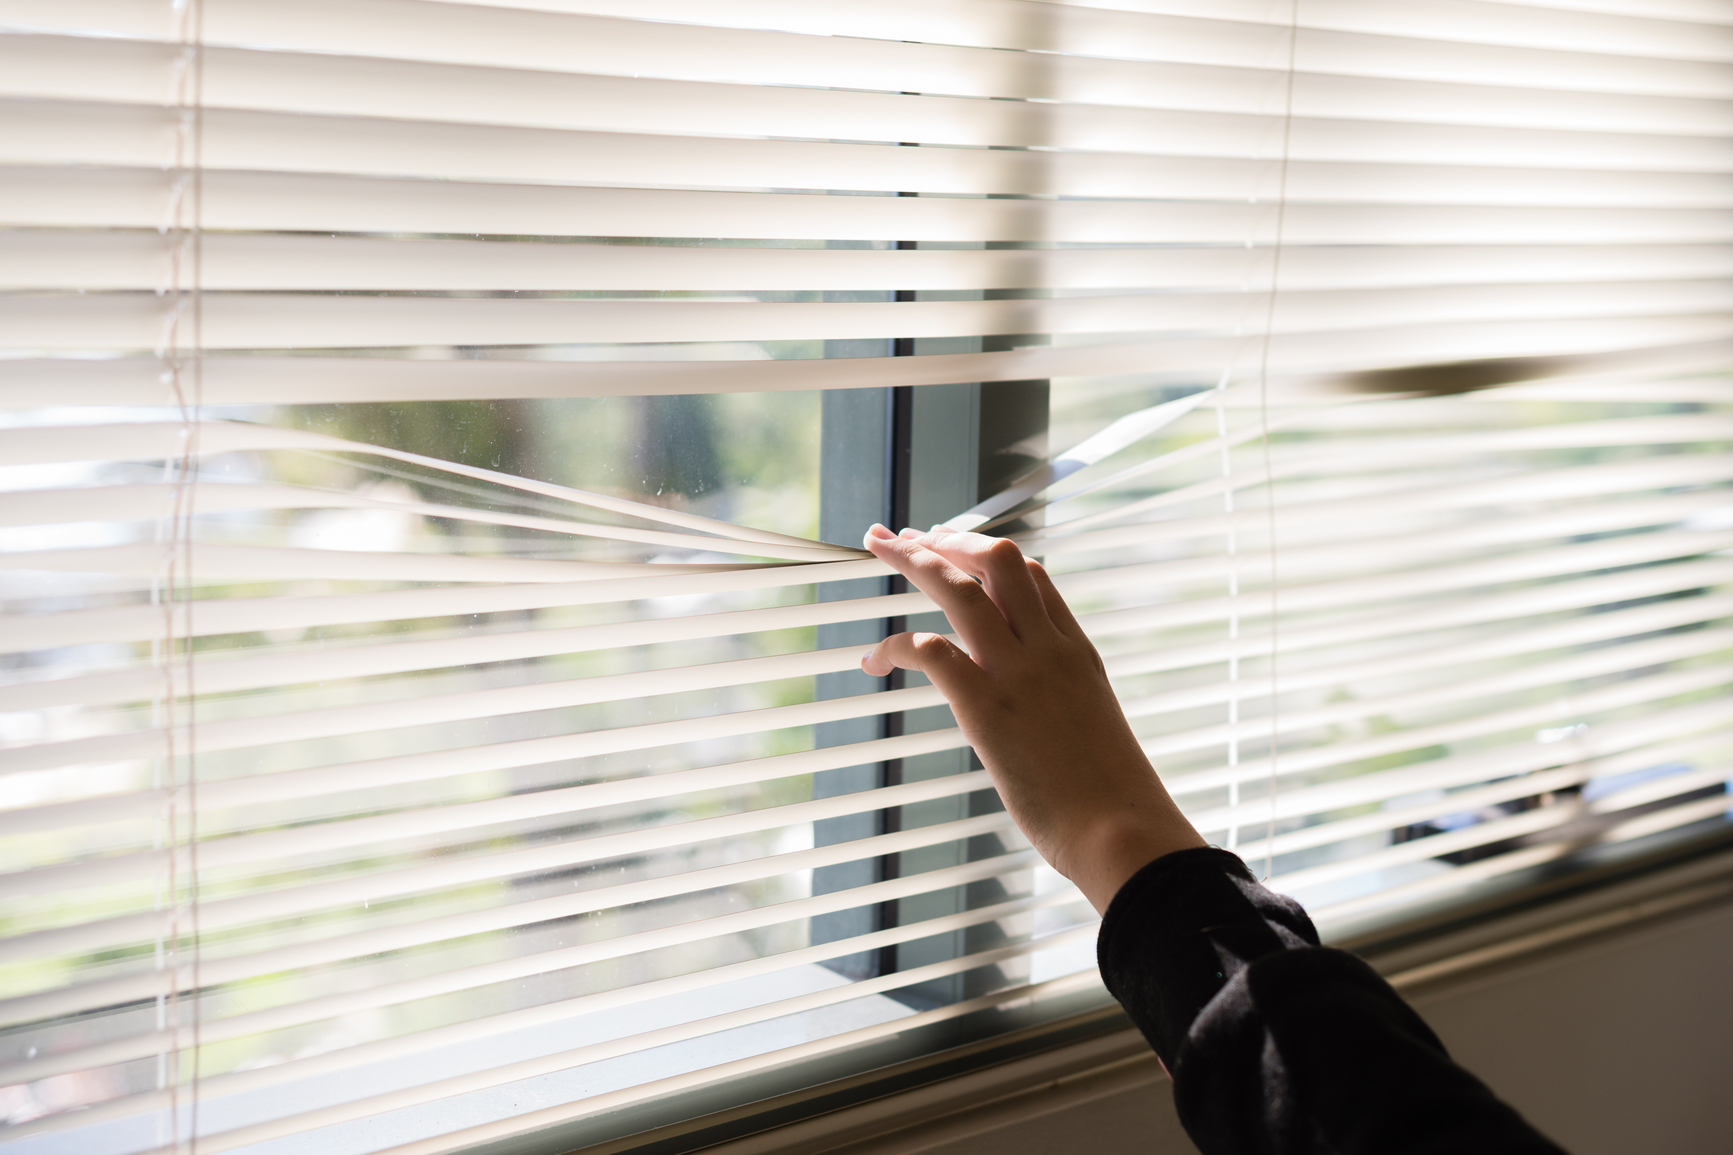 How To Put Plastic On Windows With Blinds